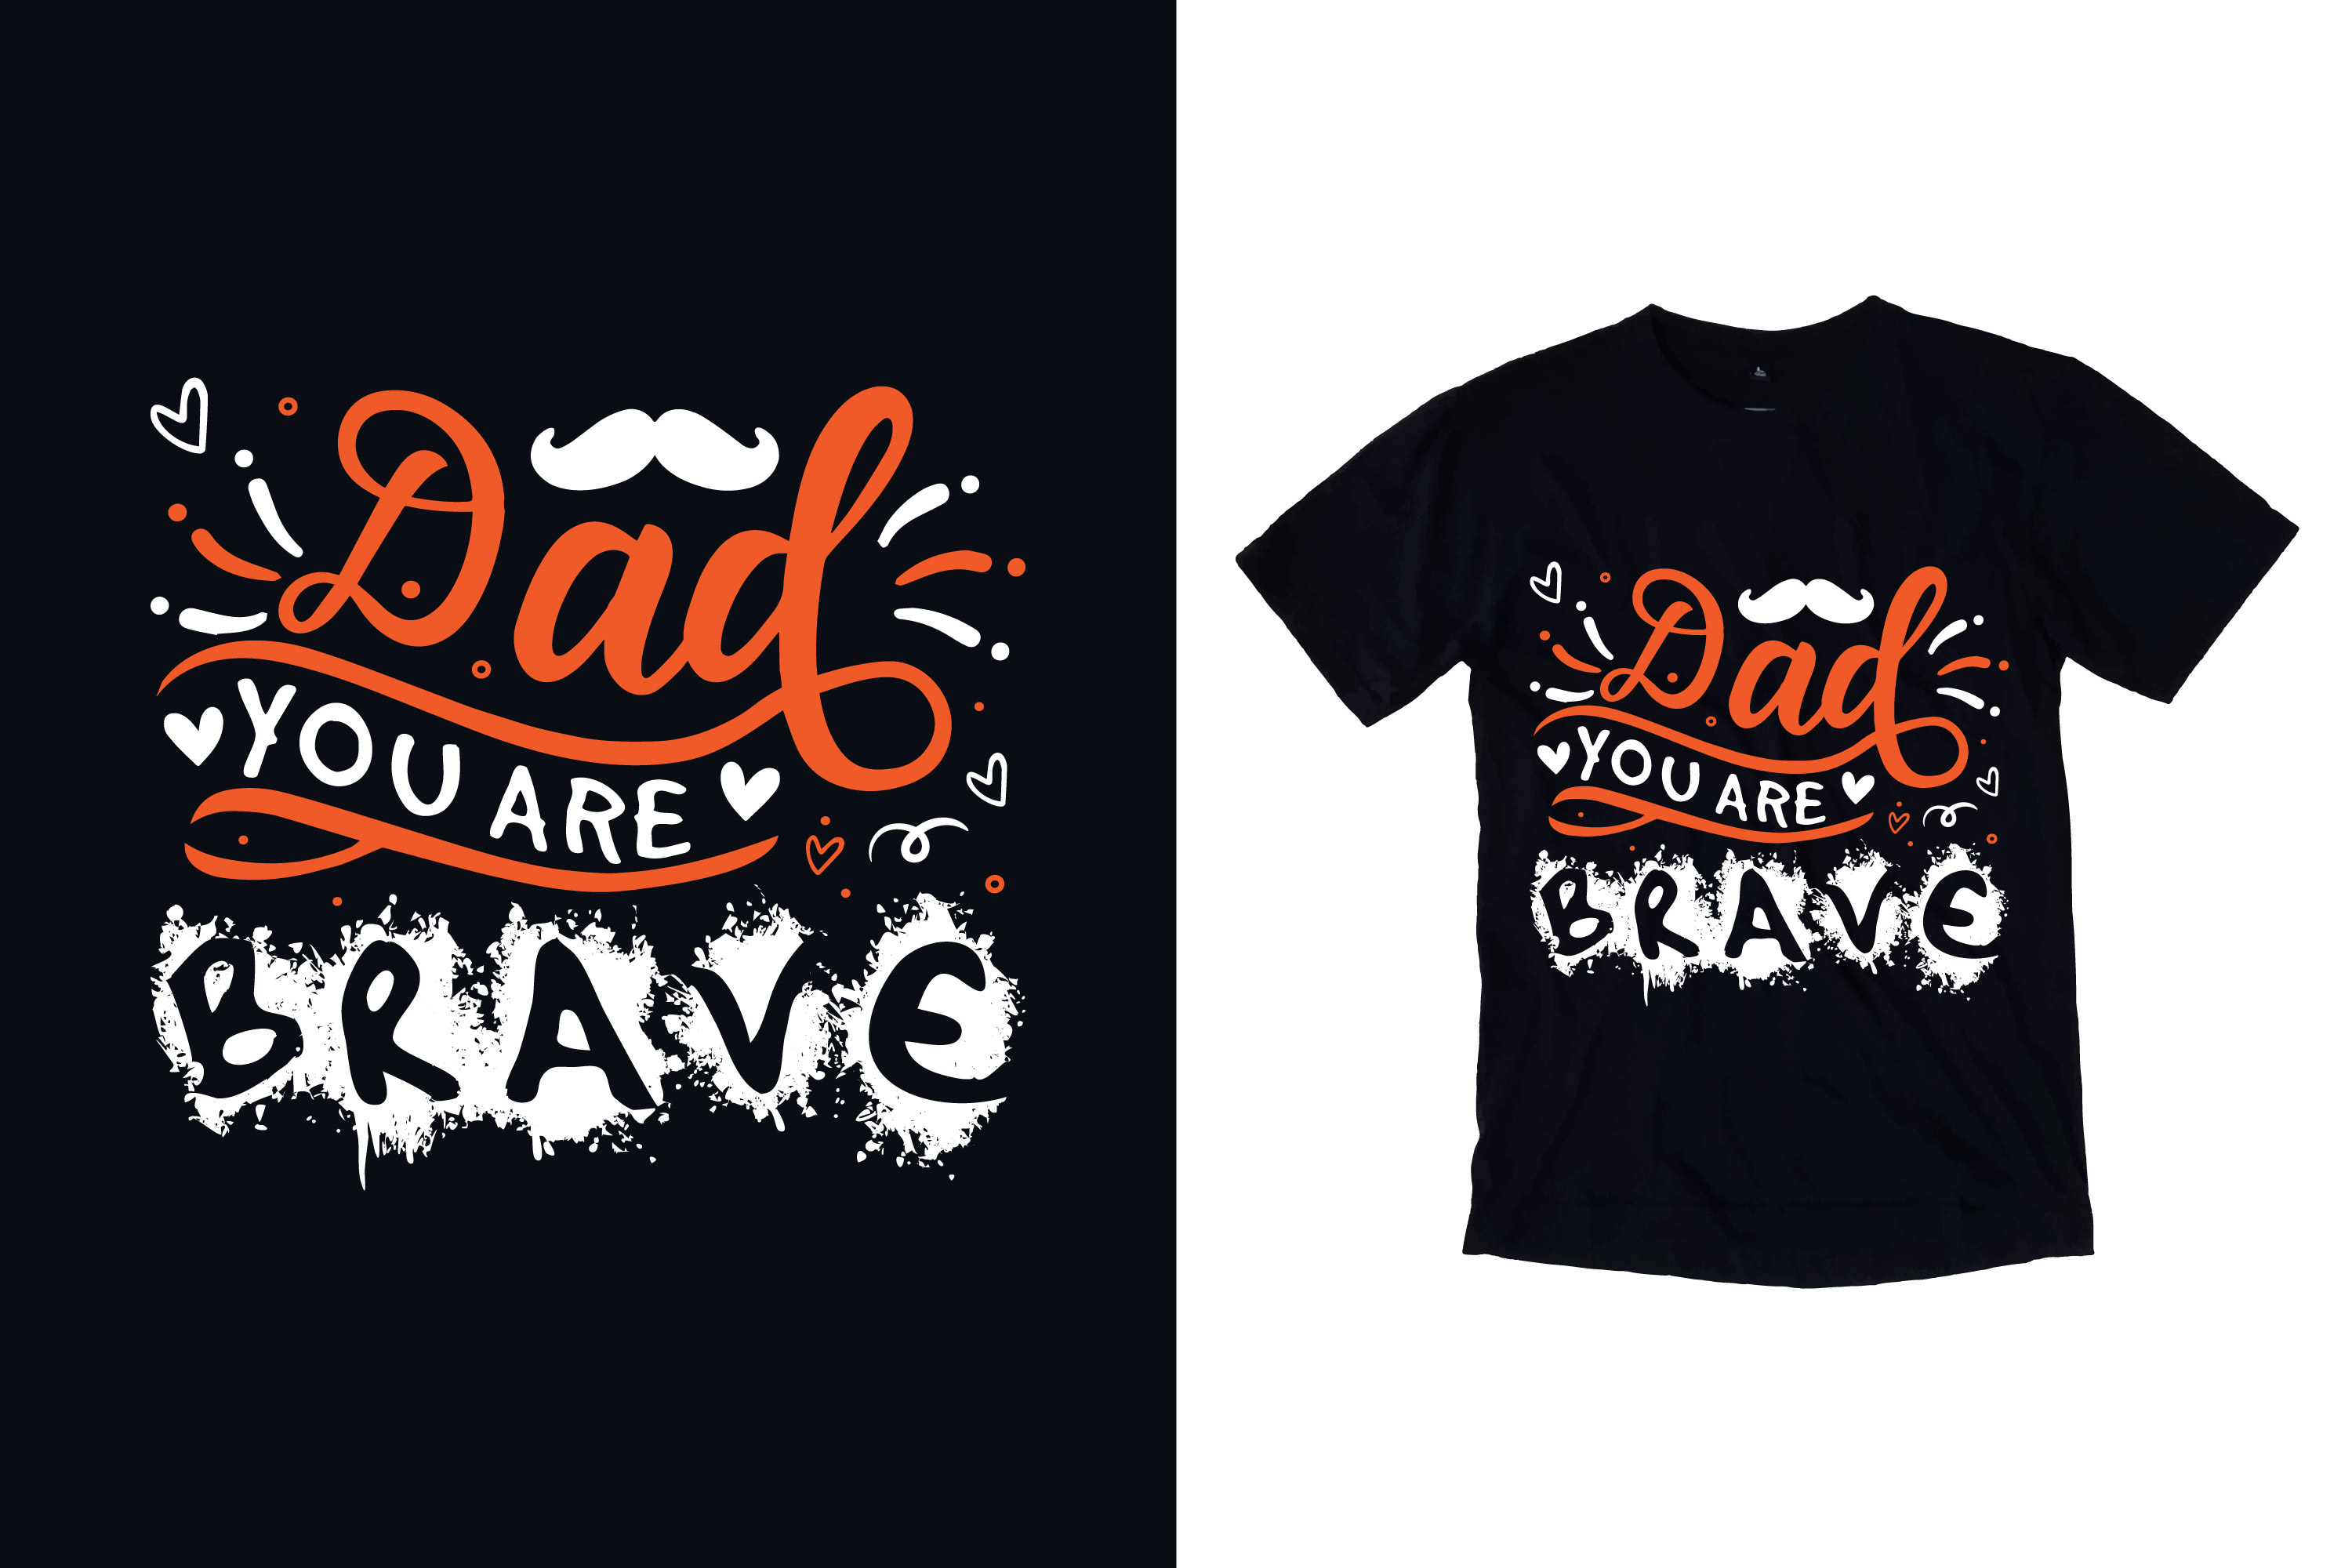 Image of a black t-shirt with an irresistible print on the theme of fatherhood.